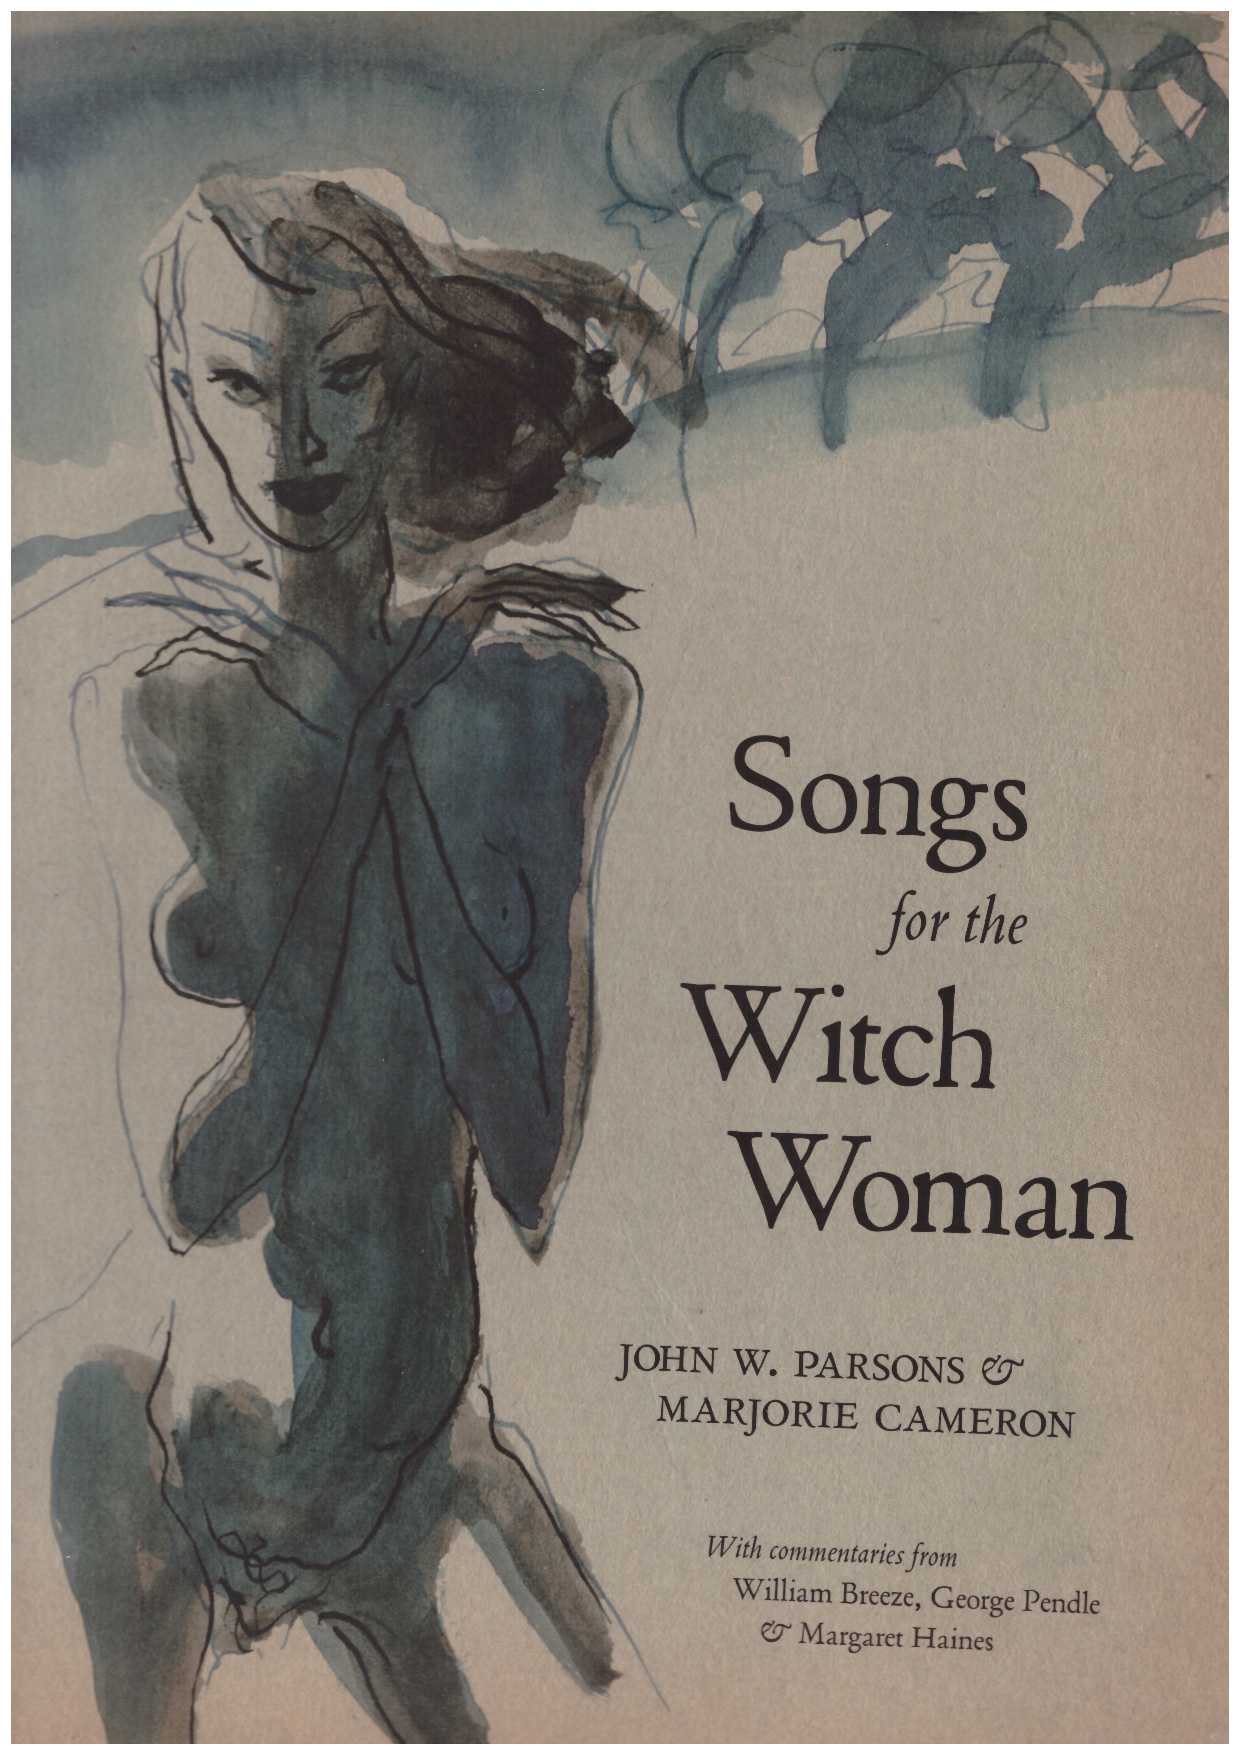 PARSONS, John W. ; CAMERON, Marjorie - Songs for the Witch Woman